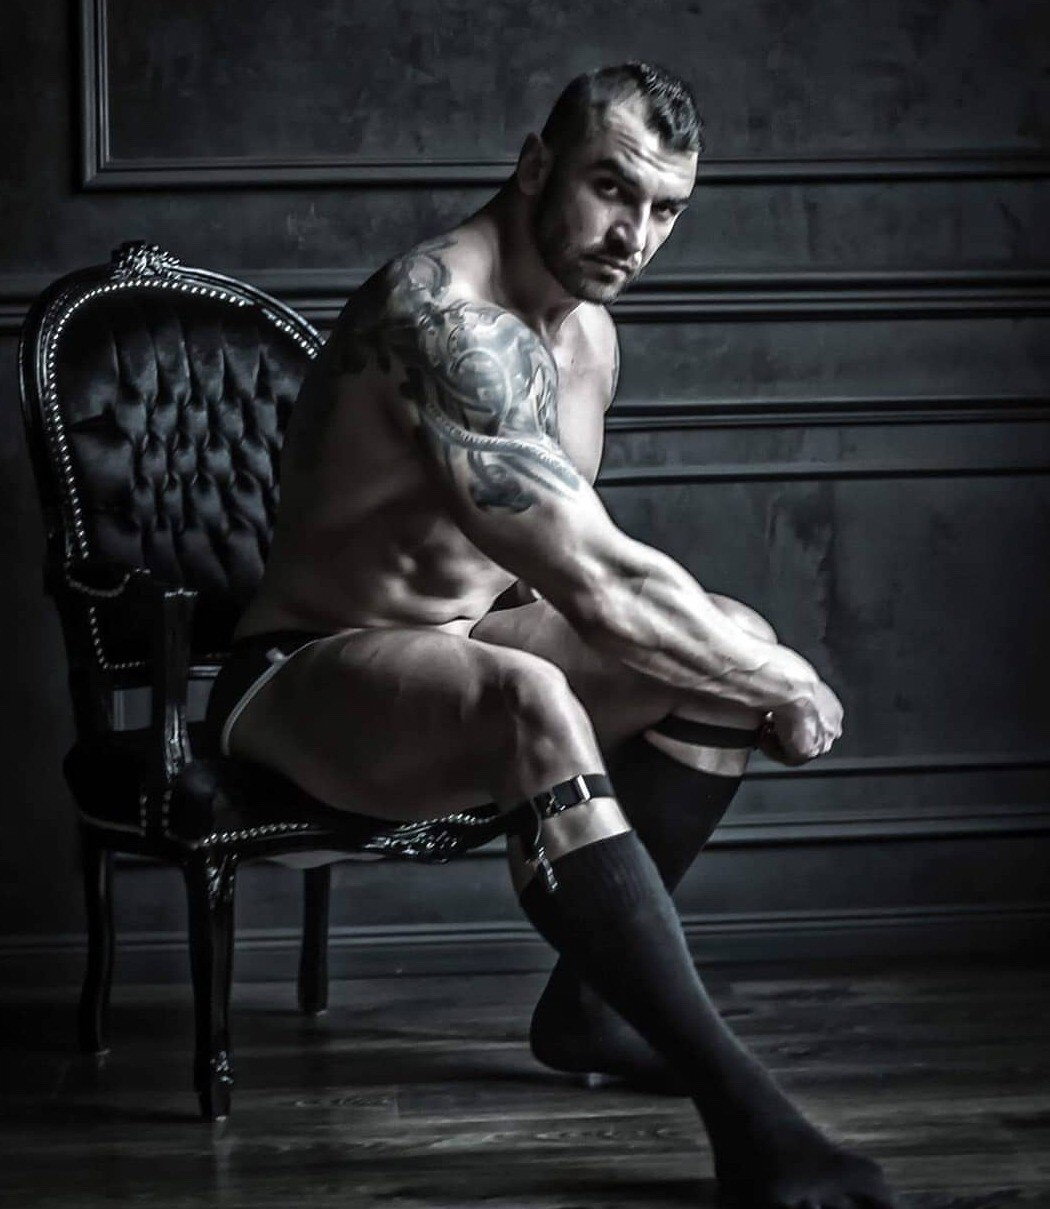 Photo by WoodyCox with the username @WoodyCox,  June 28, 2020 at 4:56 PM. The post is about the topic Male Ho-siery